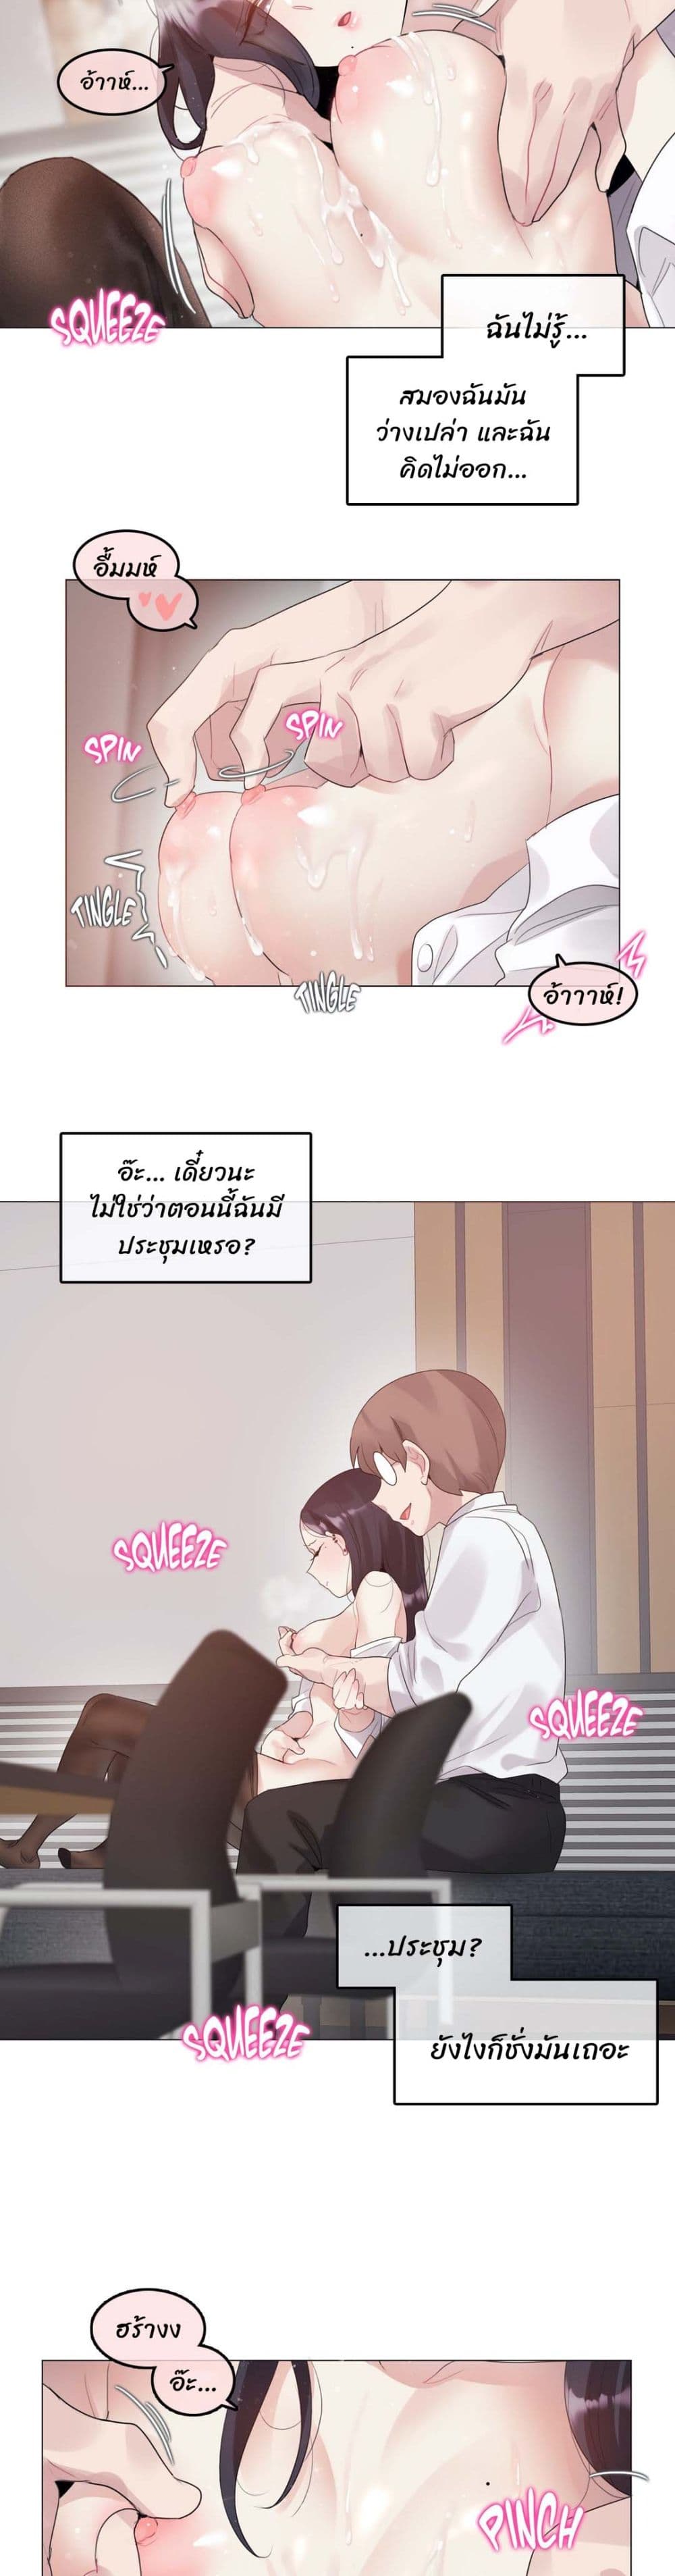 A Pervert's Daily Life 107-107